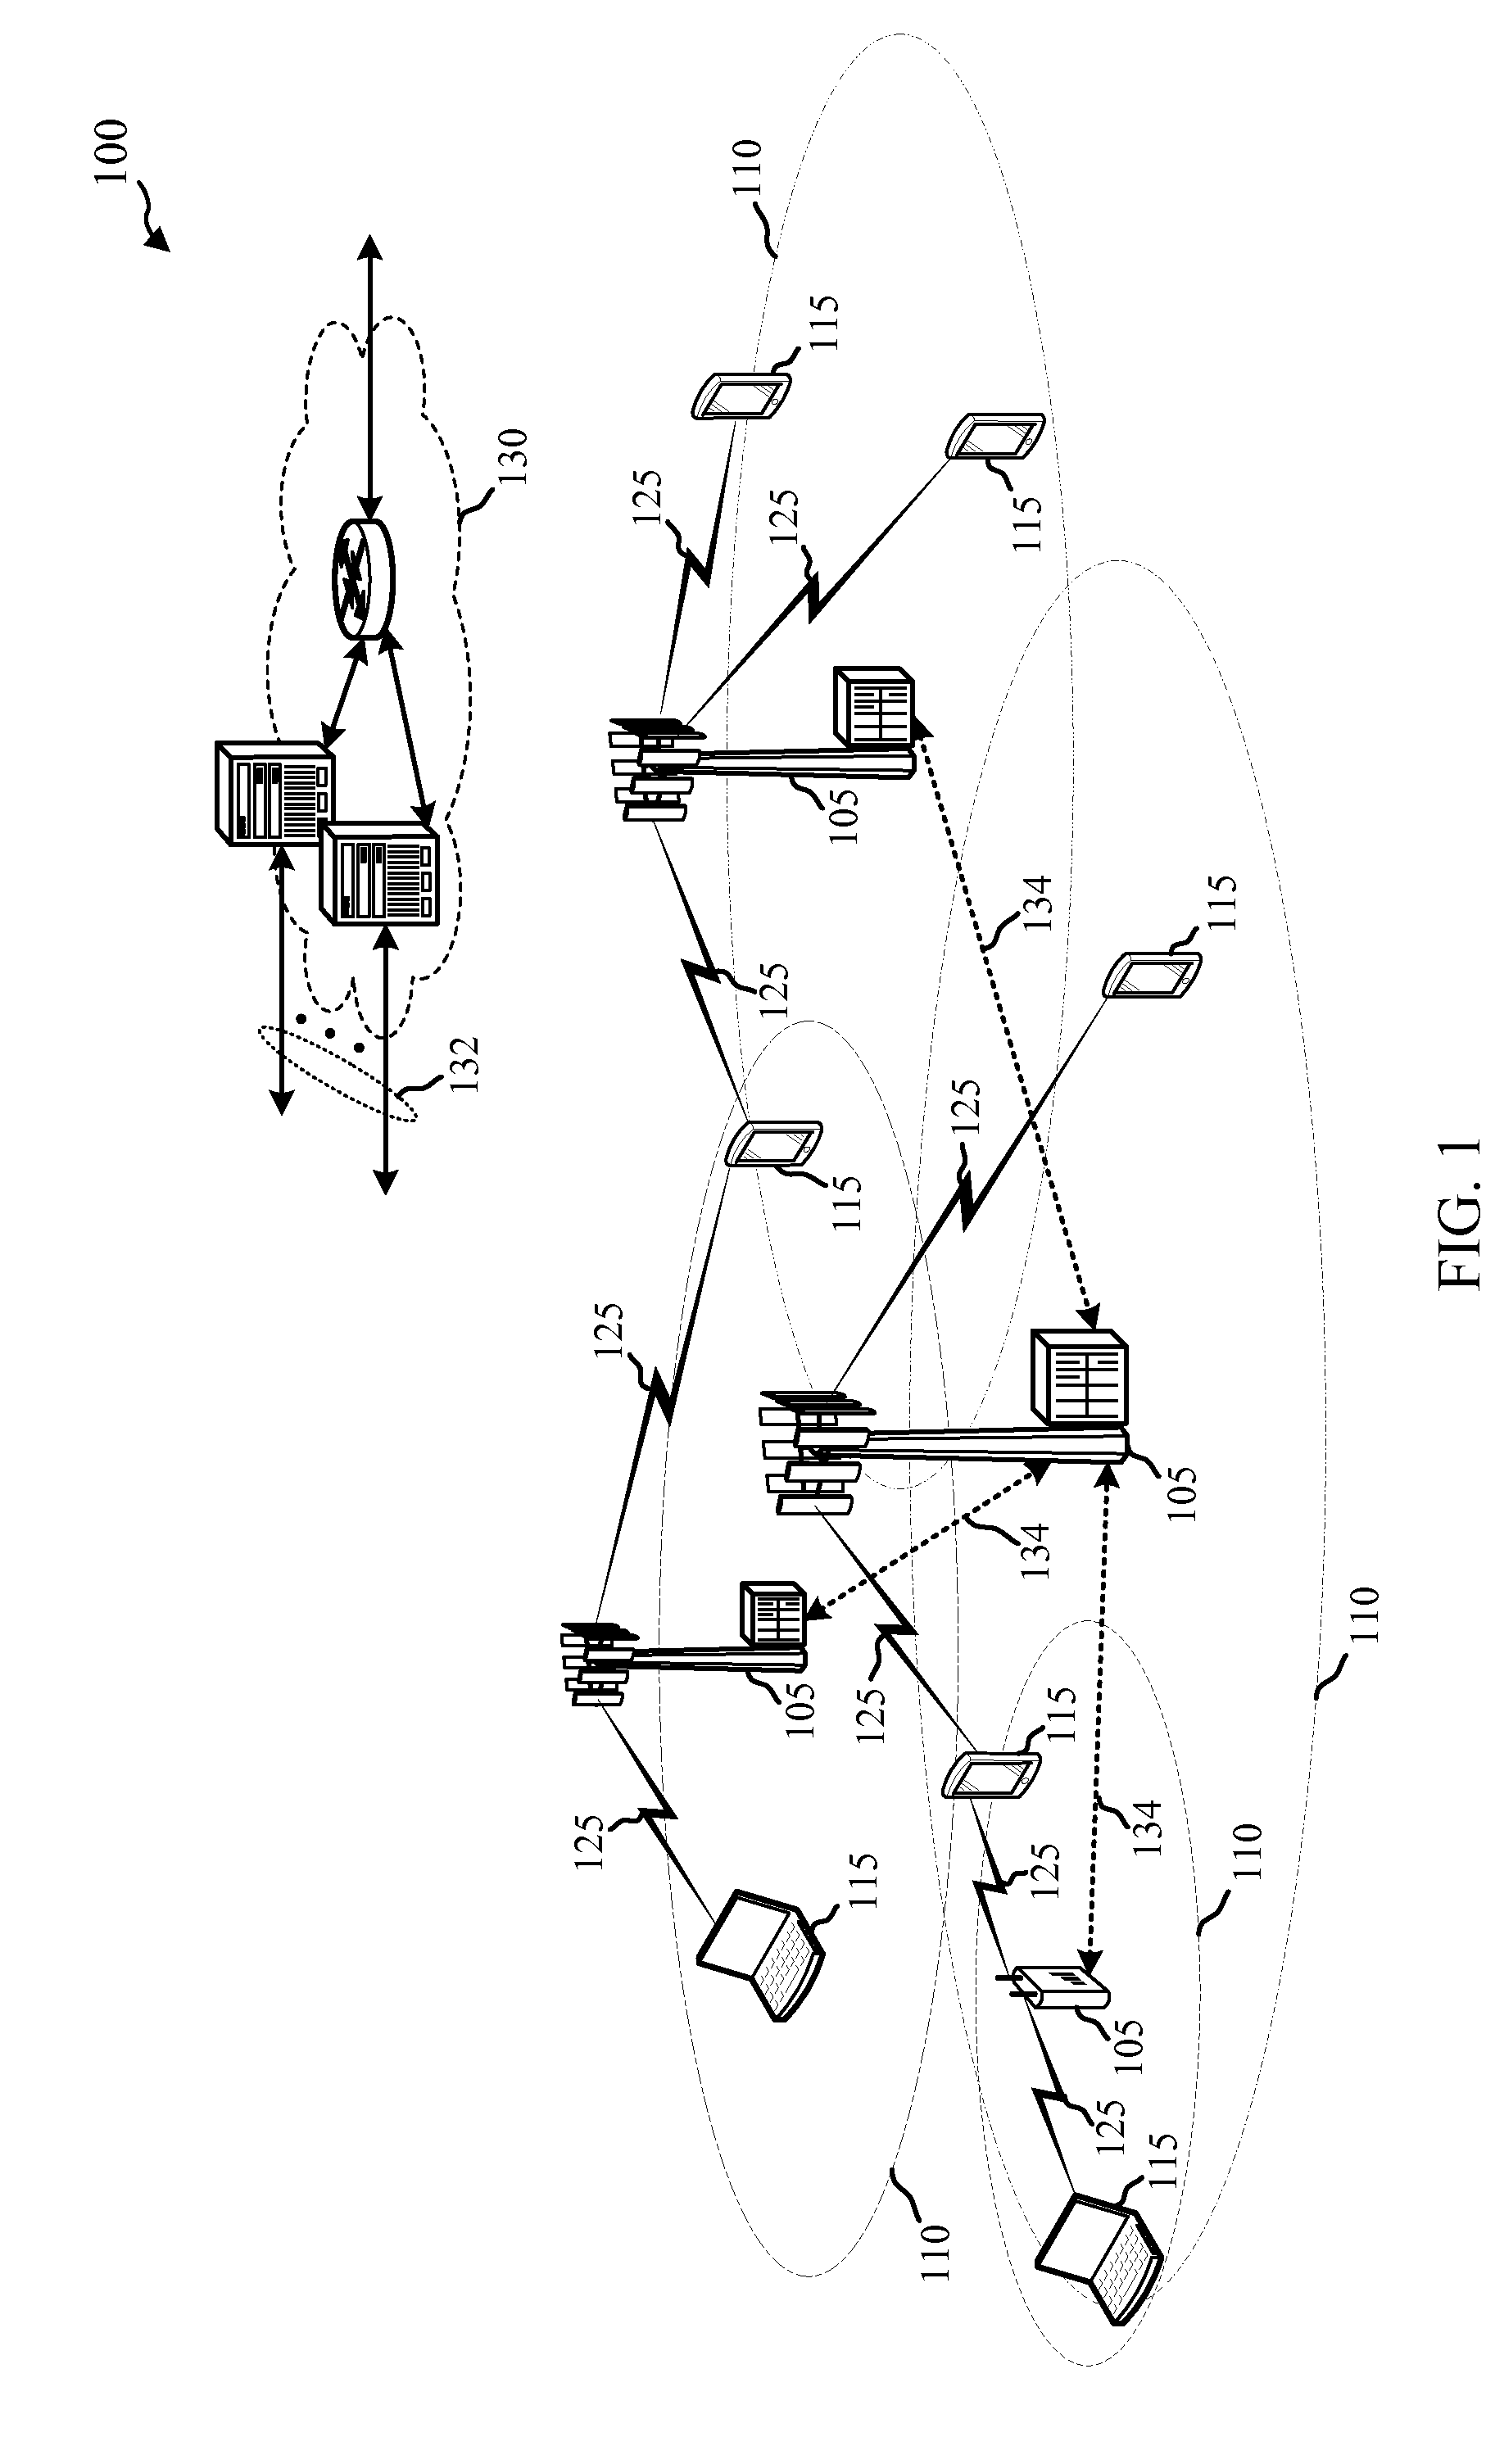 Techniques for managing power on an uplink component carrier transmitted over a shared radio frequency spectrum band